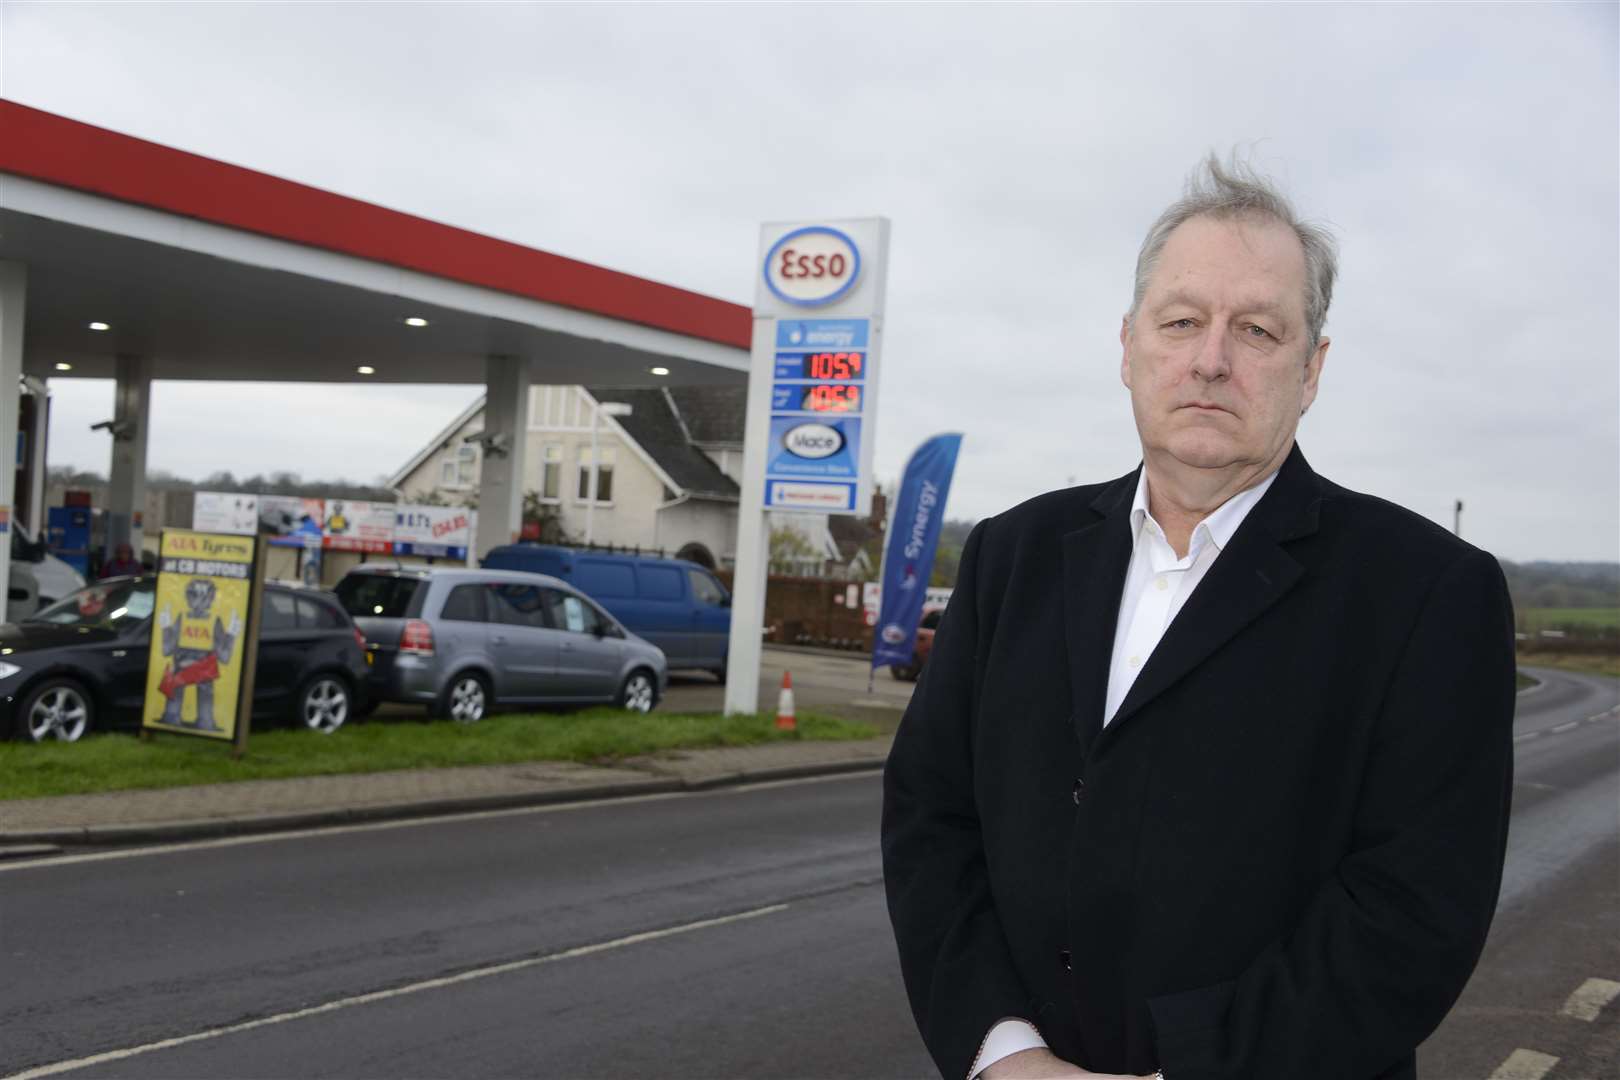 Howard Cox, founder of FairFuel UK is calling for no fuel duty hike